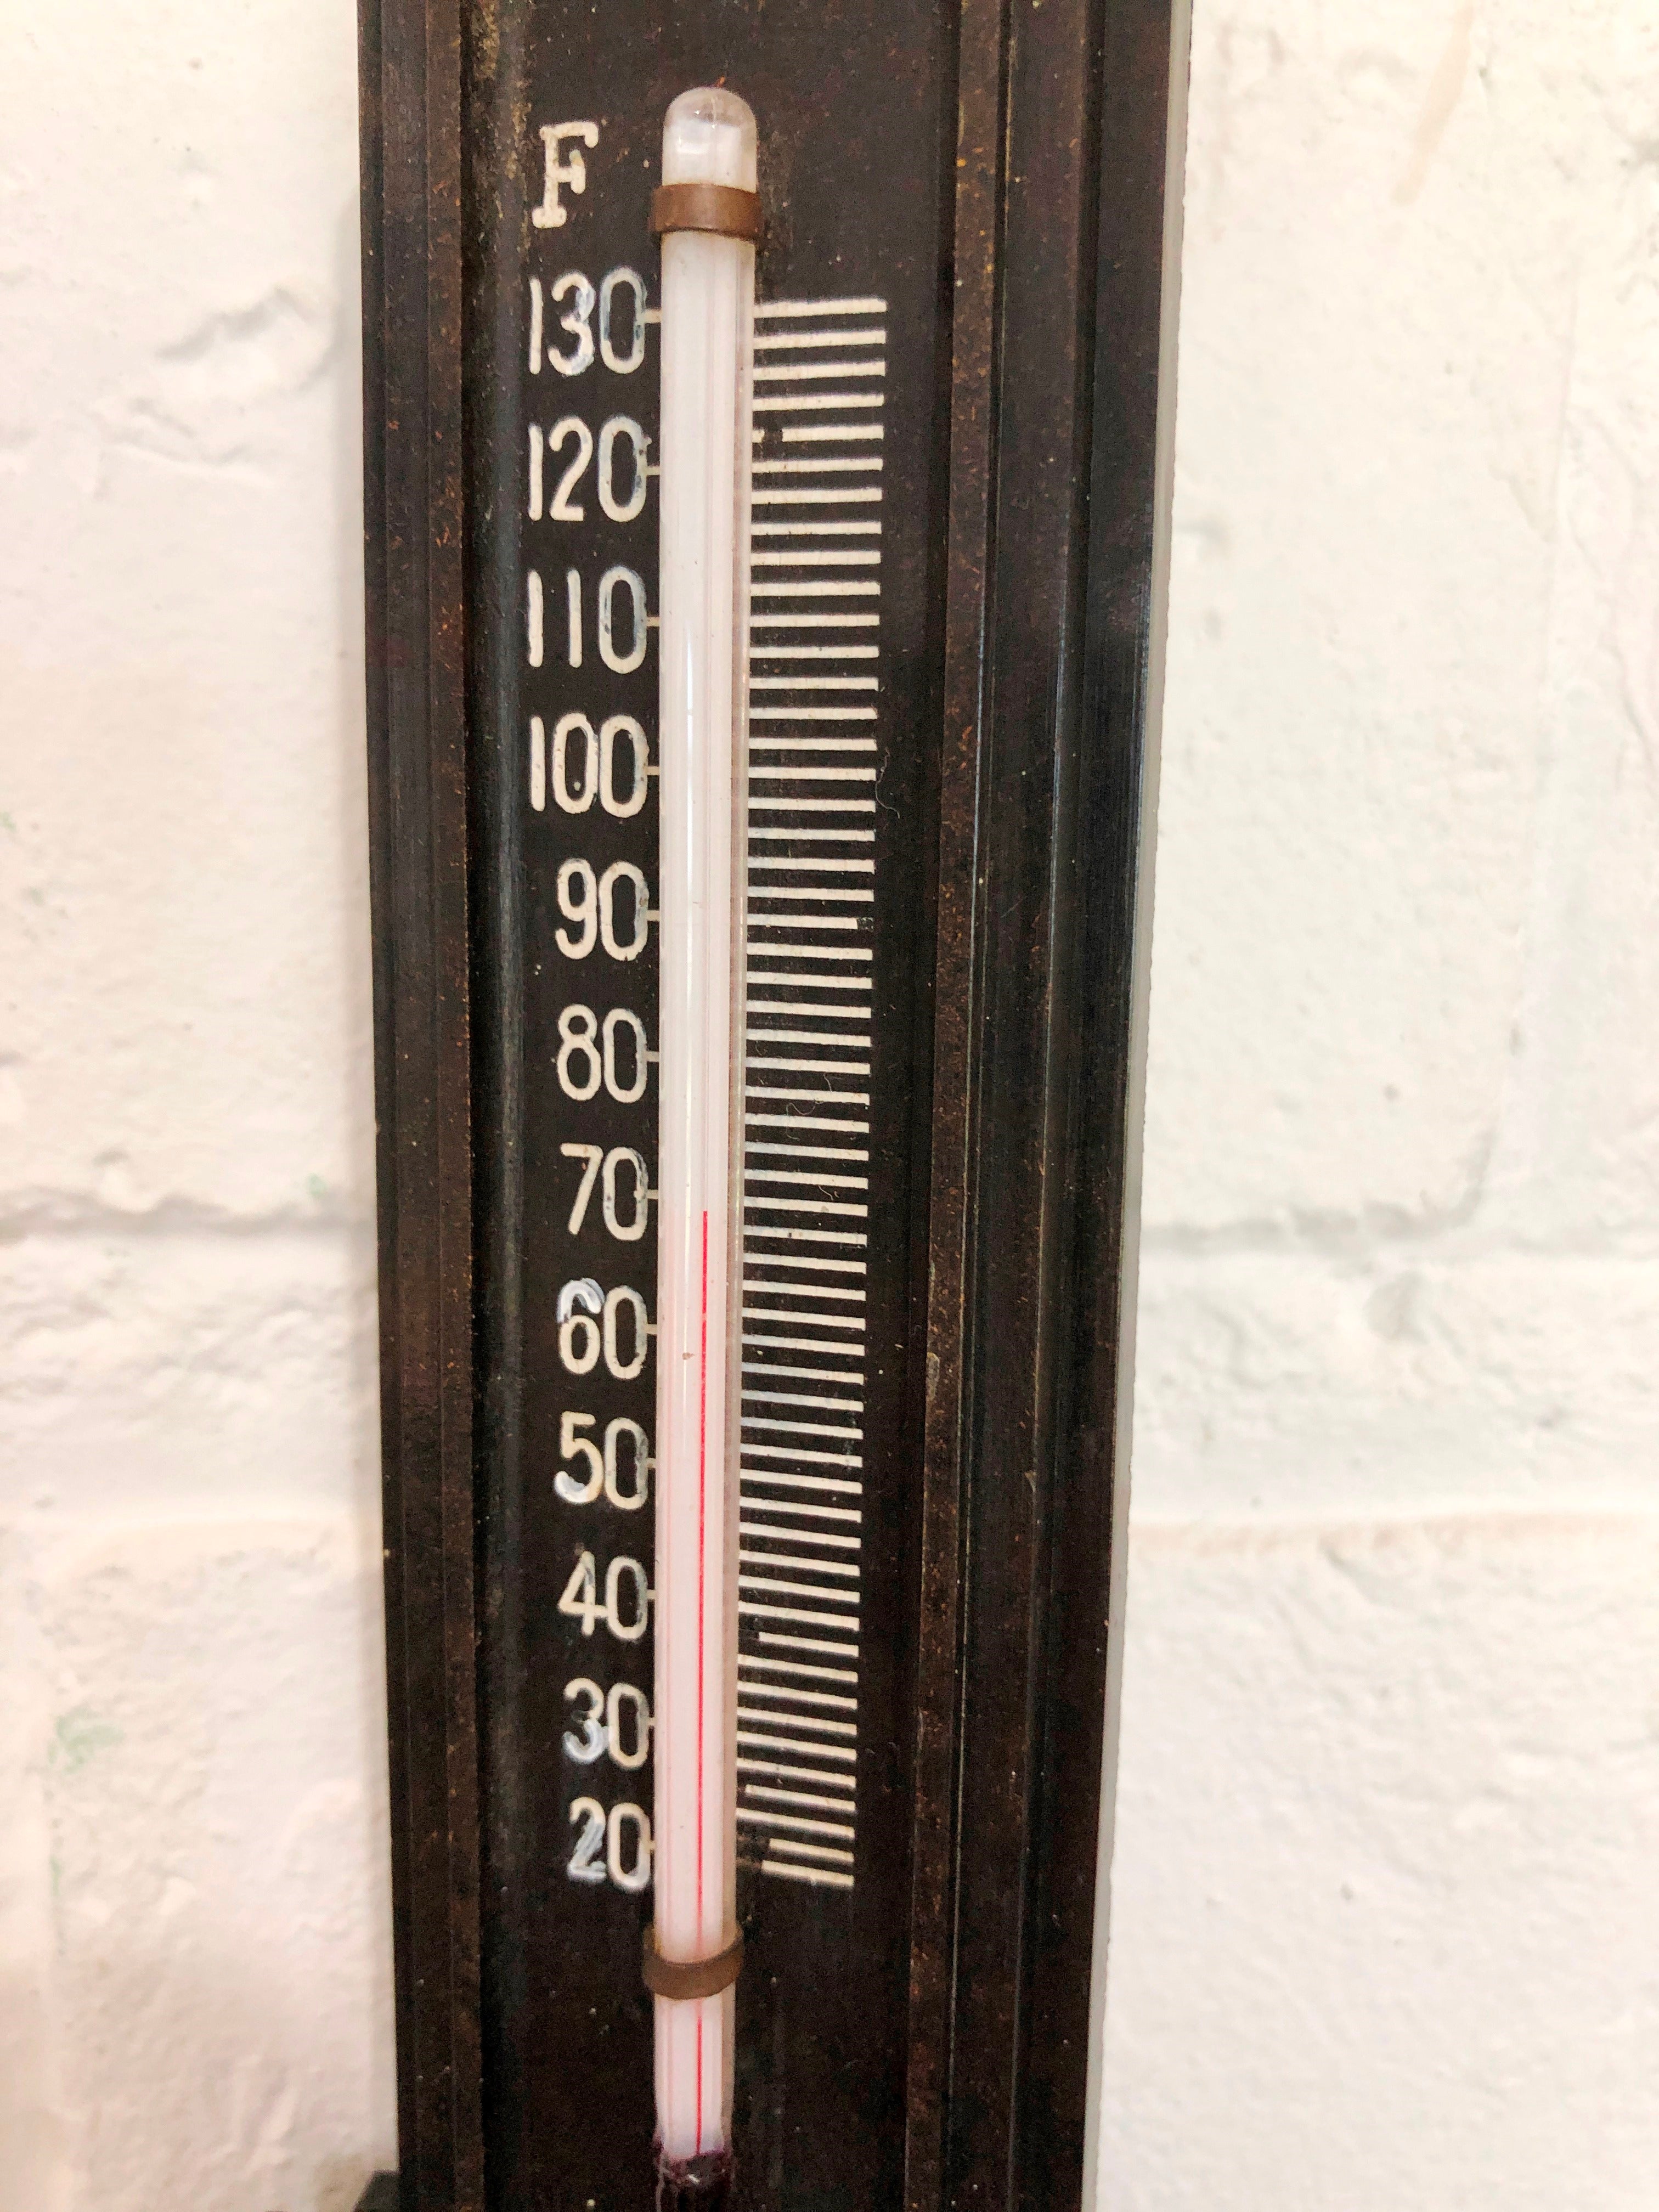 Vintage ROWCO Electrical Bakelite Wall Thermometer | eXibit collection